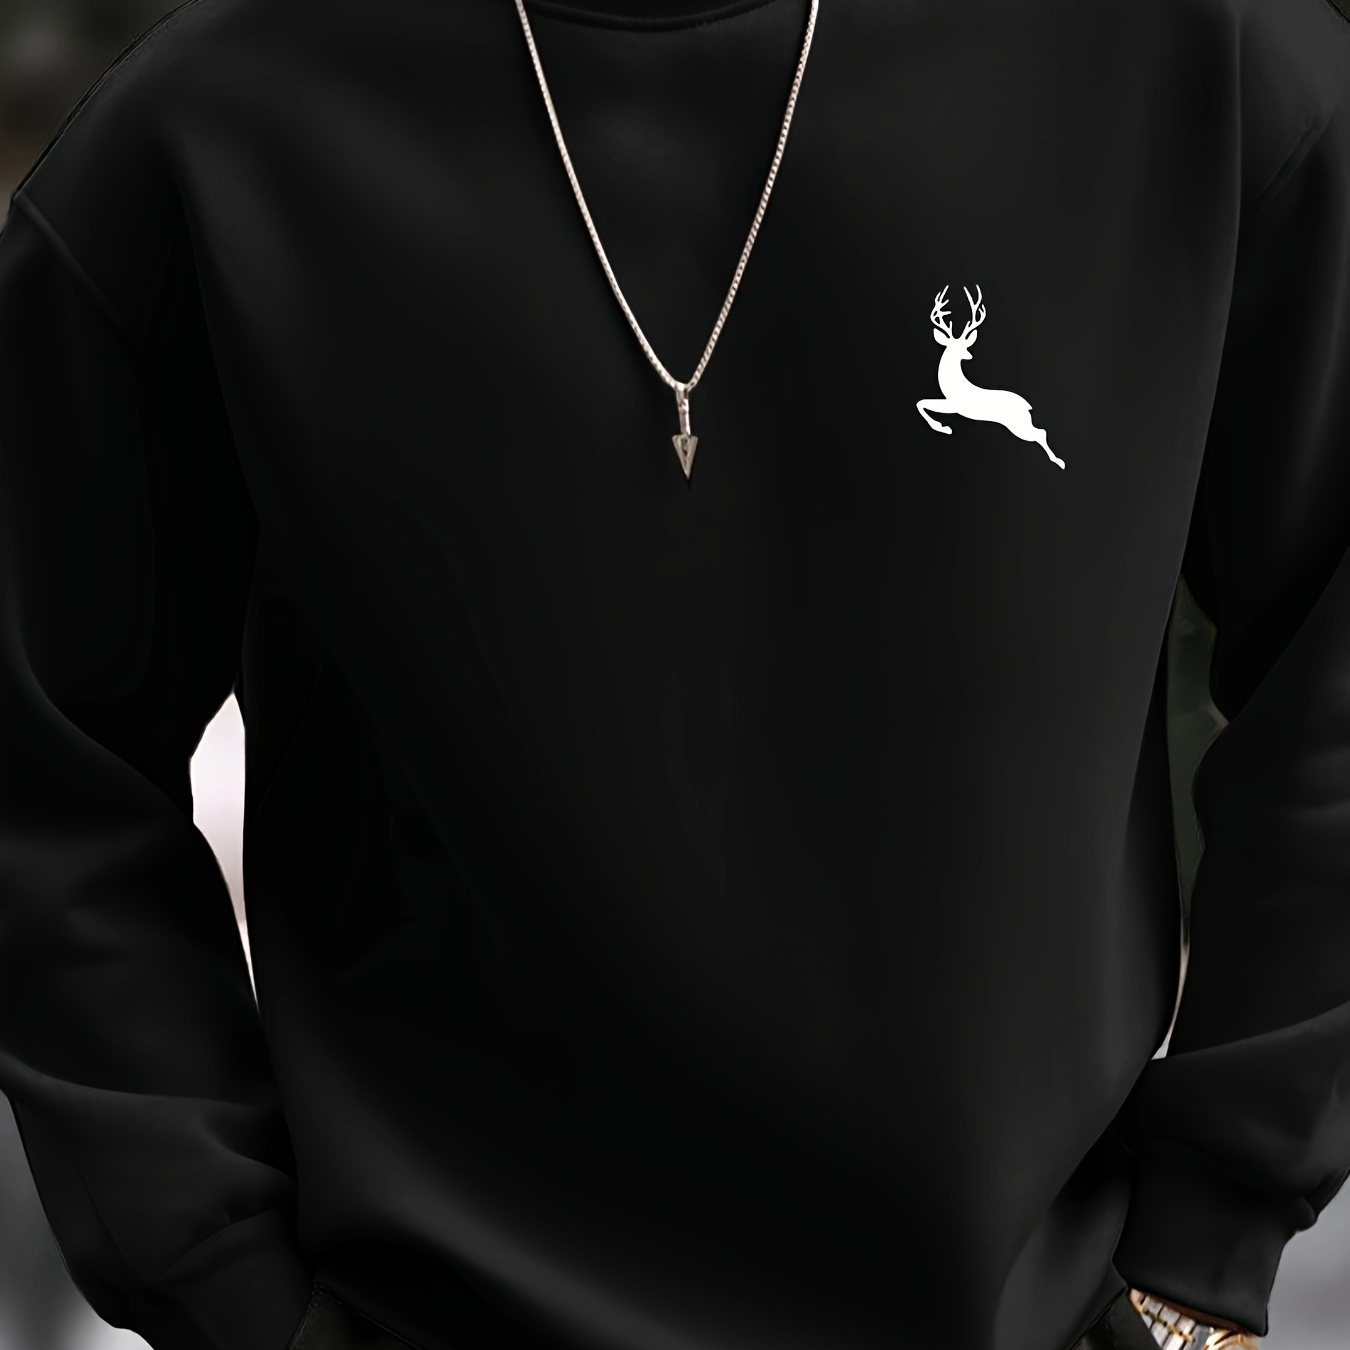 

Deer Print Fashionable Men's Casual Long Sleeve Crew Neck Pullover Sweatshirt, Suitable For Outdoor Sports, For Autumn Spring, Can Be Paired With Necklace, As Gifts